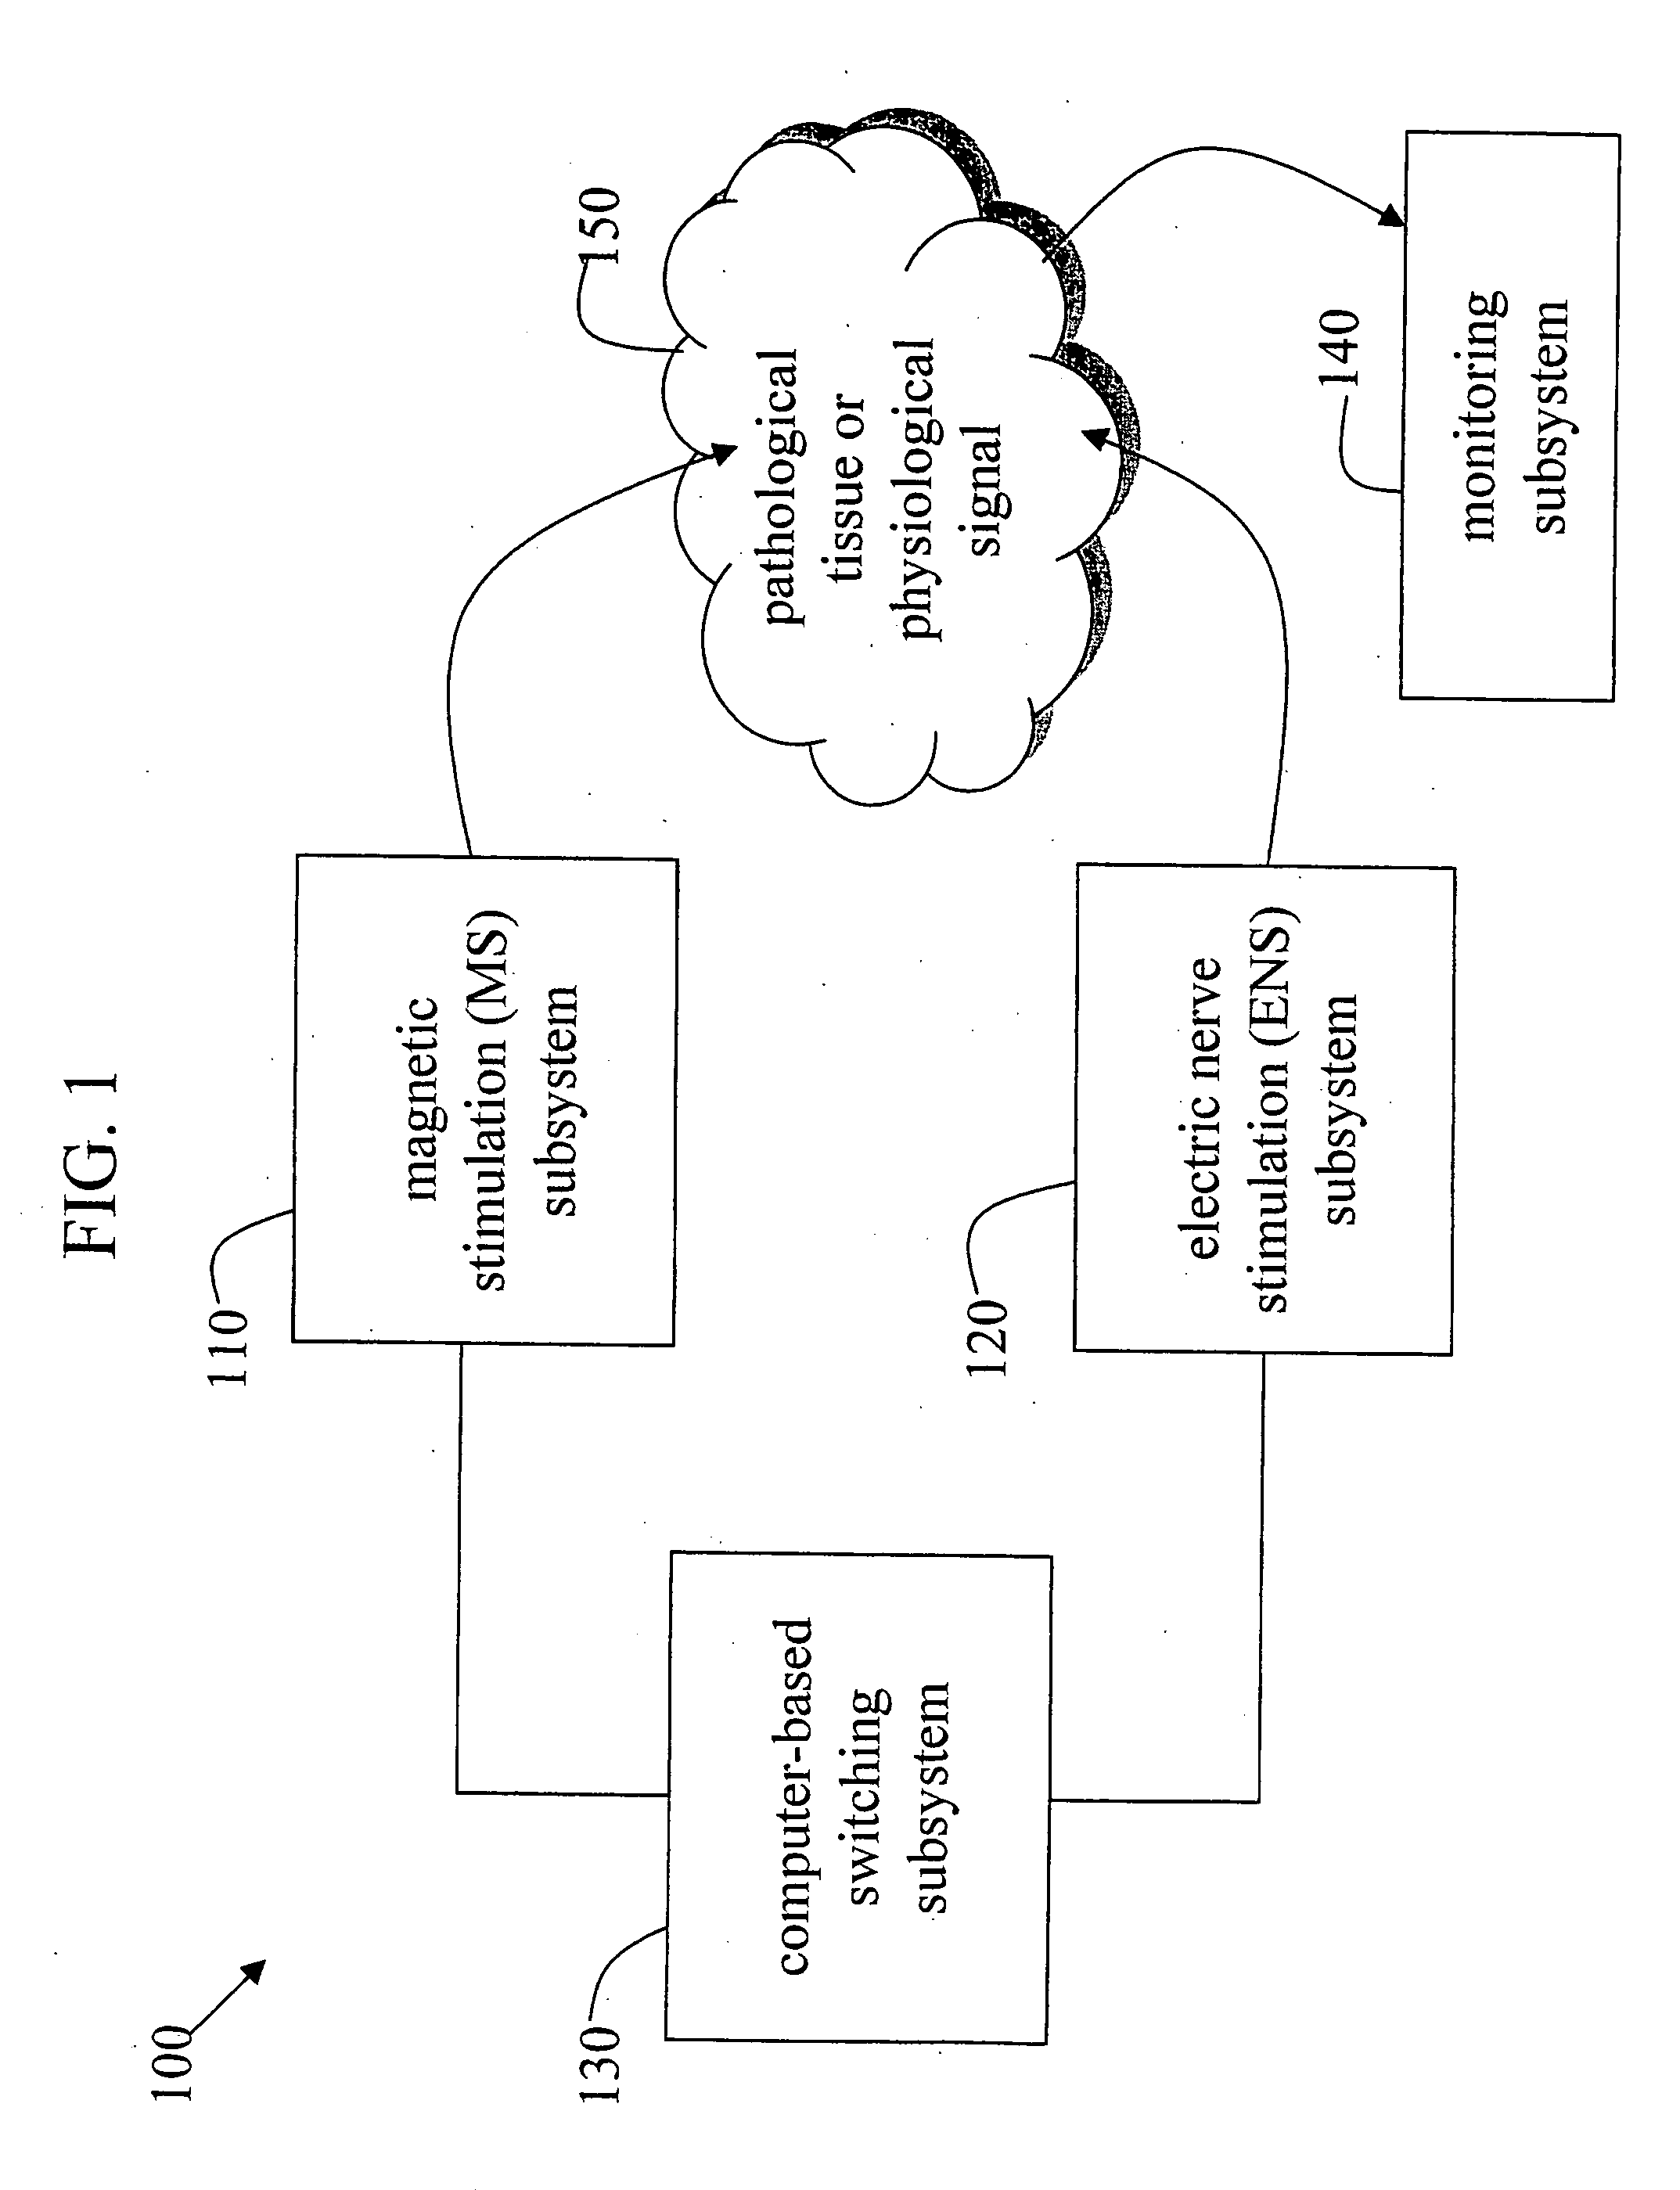 Systems and methods for therapeutically treating neuro-psychiatric disorders and other illnesses